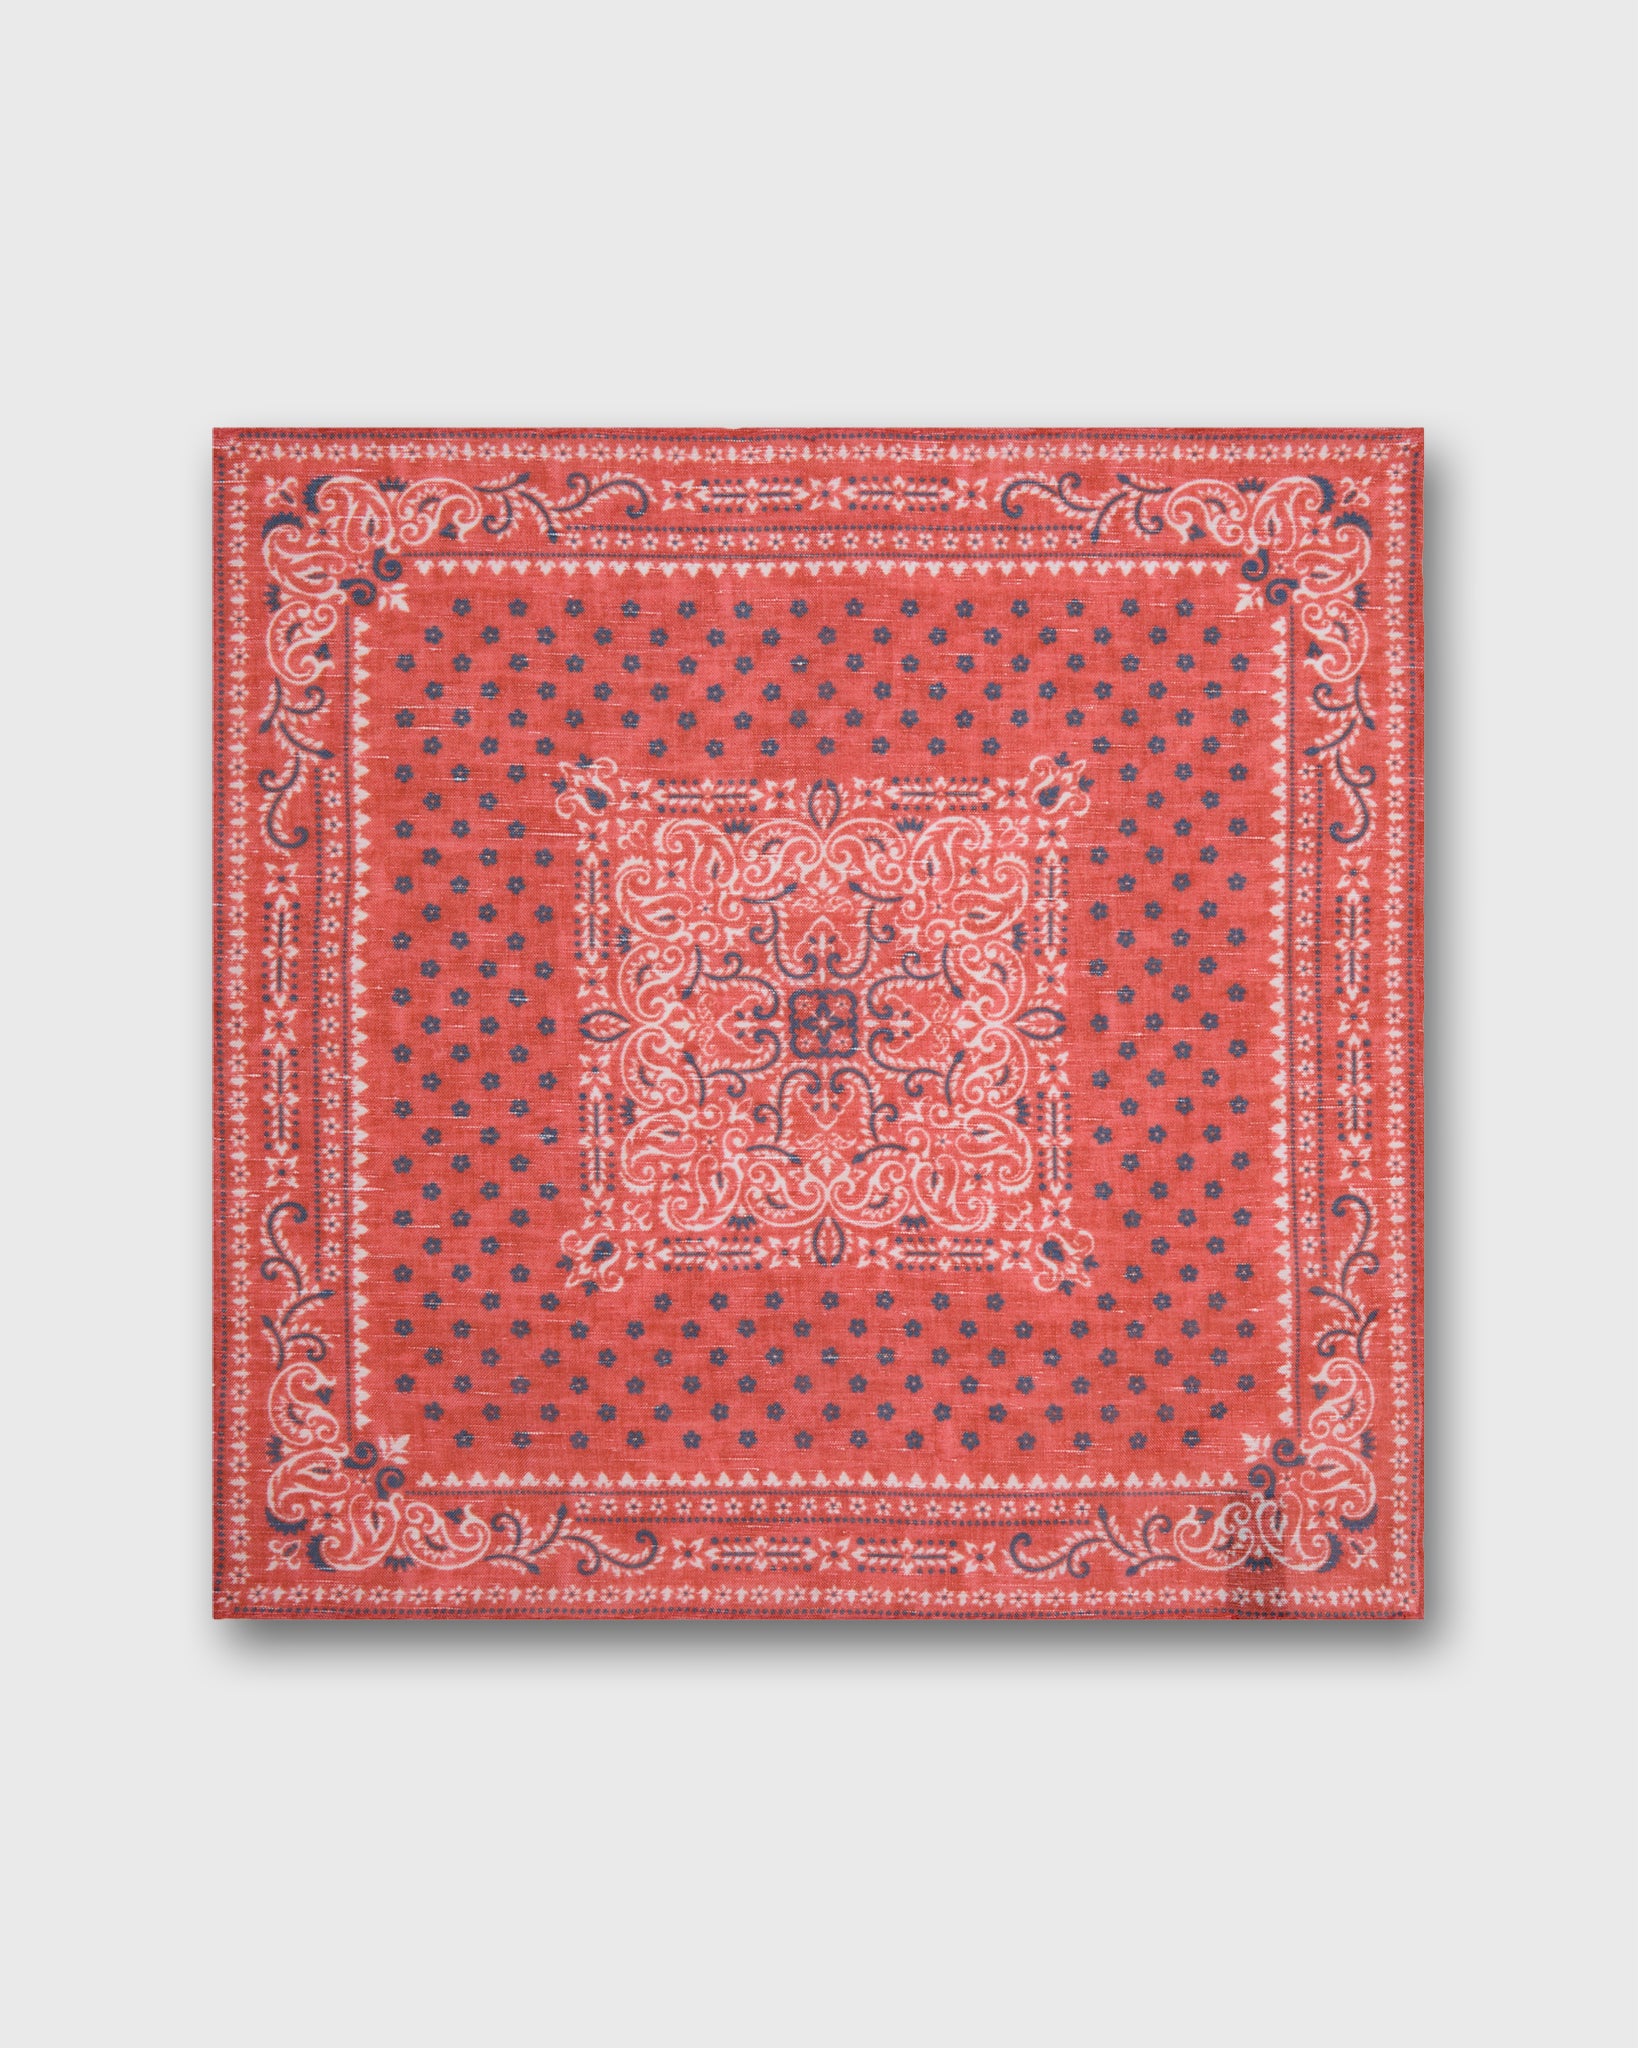 Linen/Cotton Print Pocket Square in Salmon/Navy Flower Paisley